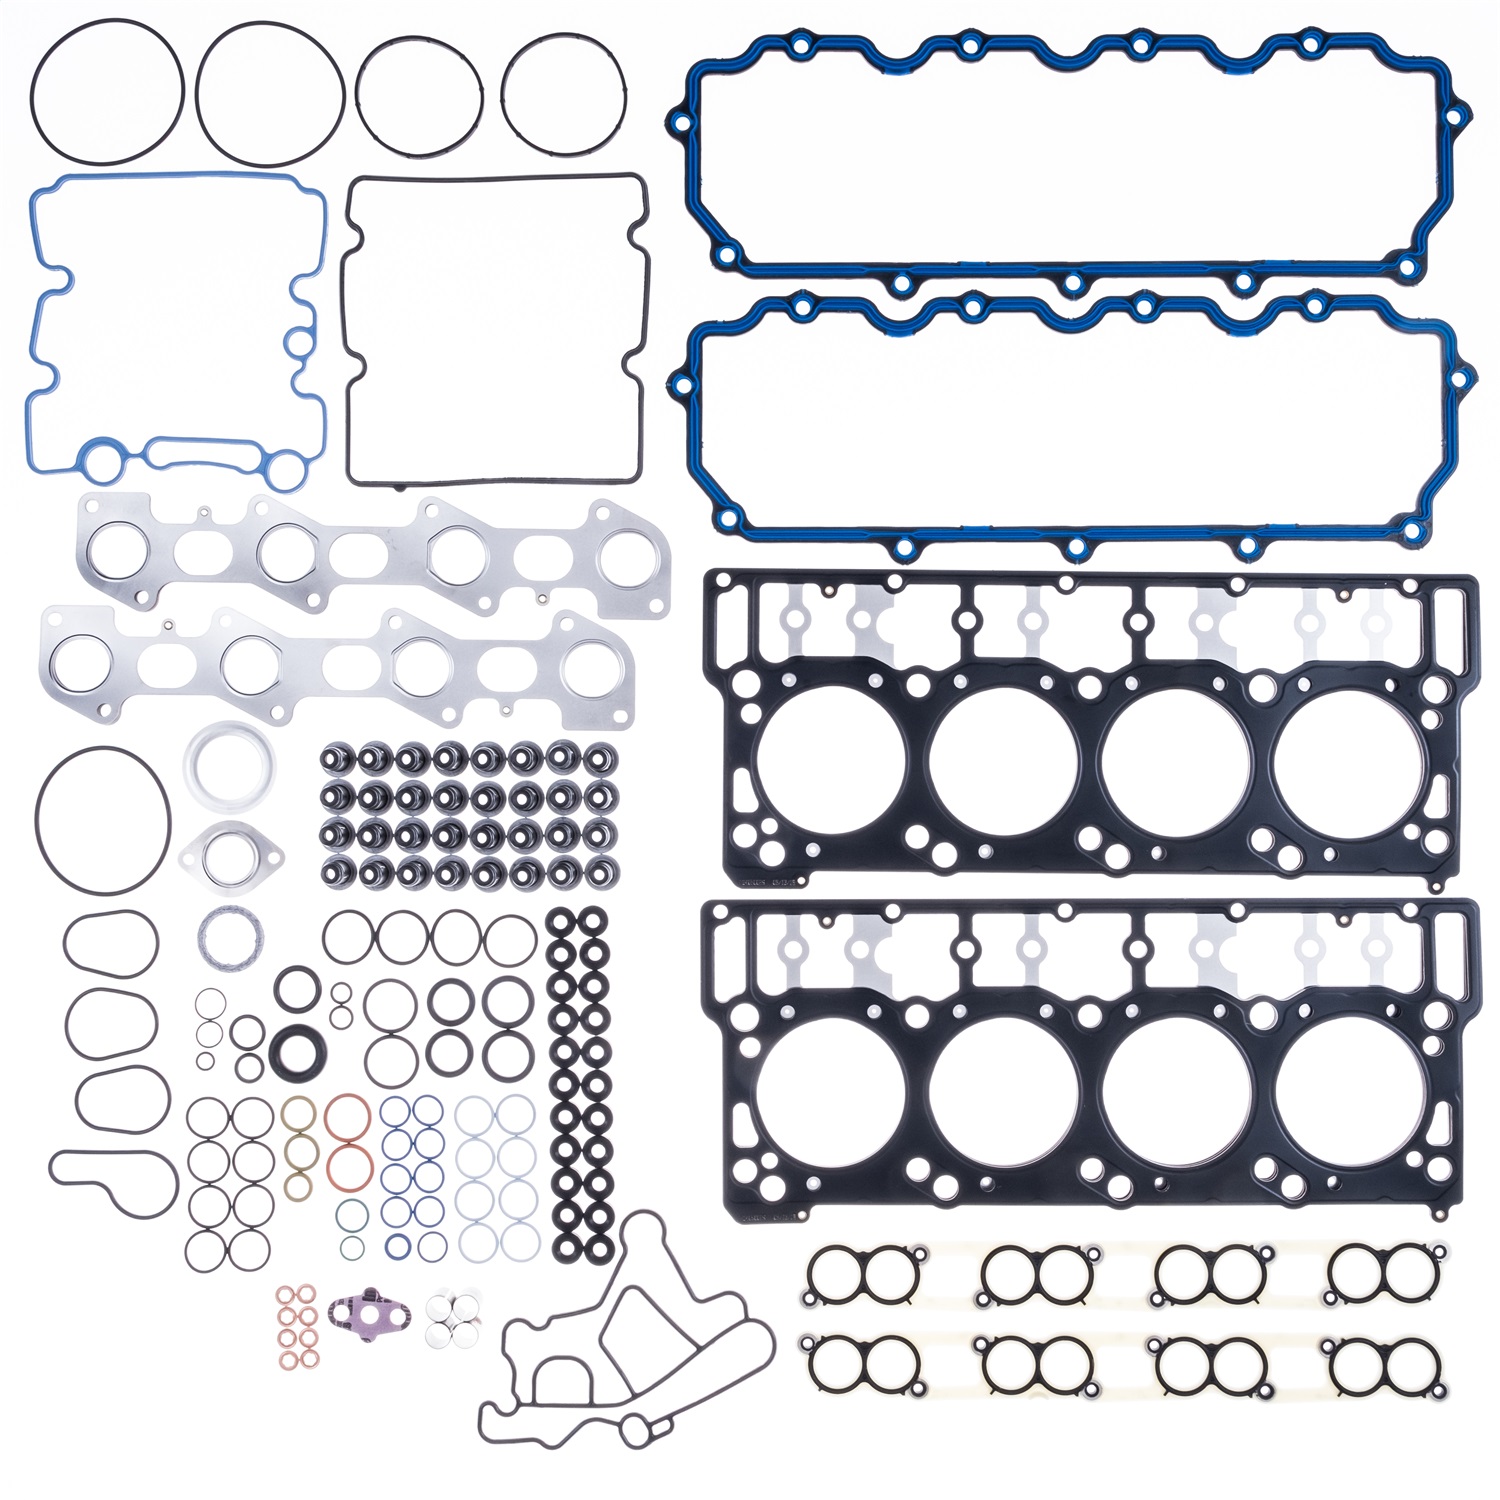 Cometic Gasket Automotive Pro3005t Top End Gasket Kit Fits select: 2004-2006 FORD F250, 2003-2006 FORD F350 - image 1 of 5